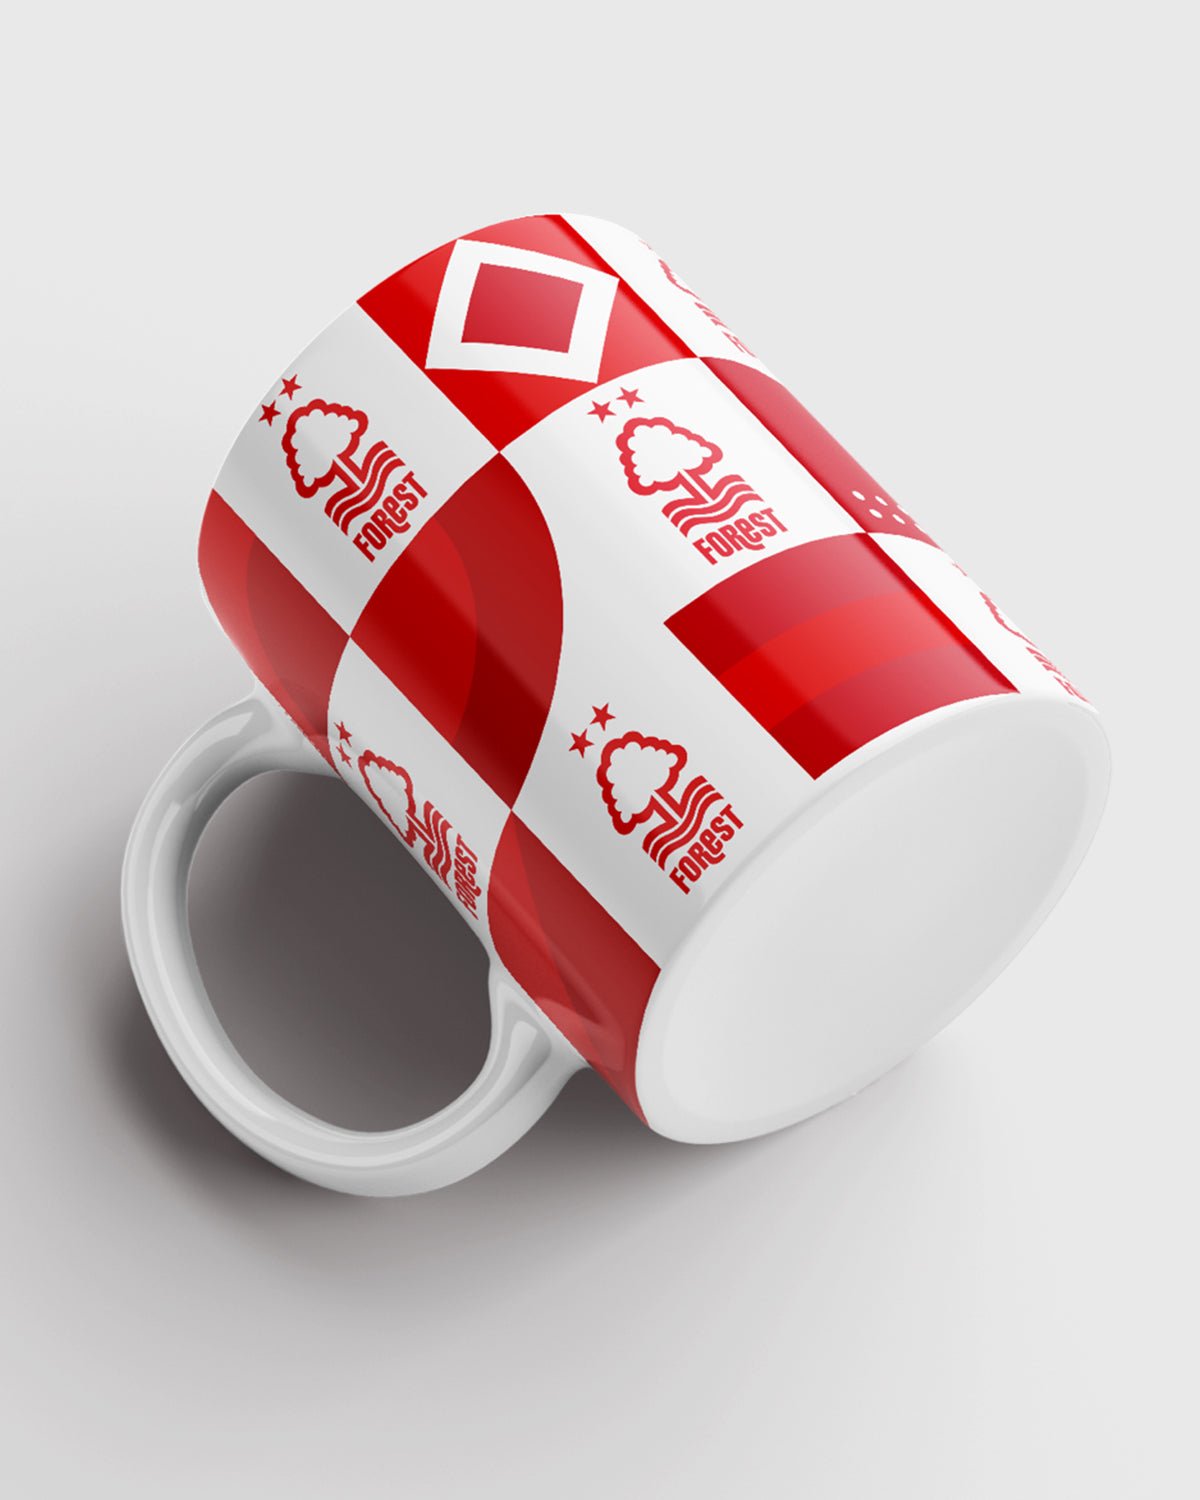 NFFC Two Tone Abstract Mug - Nottingham Forest FC